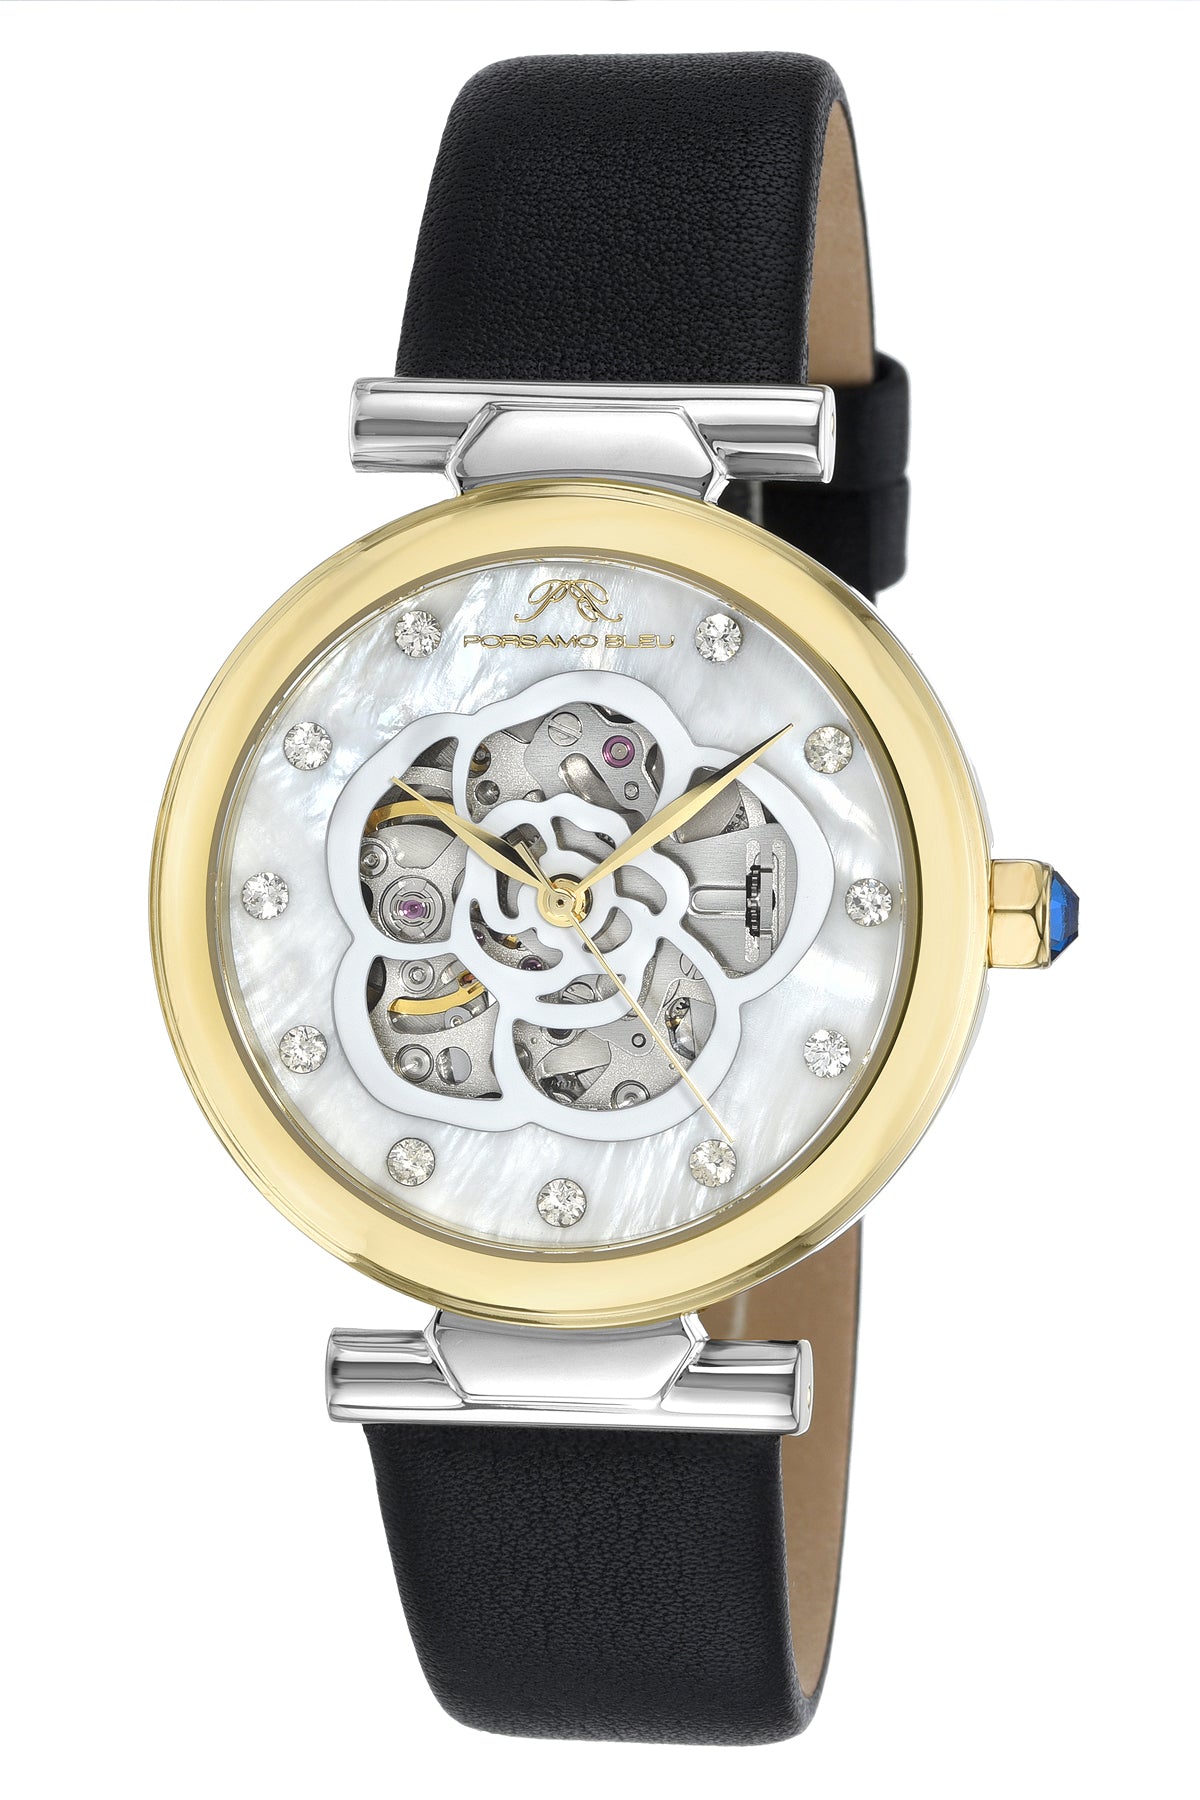 Porsamo Bleu Laura Luxury Automatic Topaz Women's Genuine Leather Band Watch, With Mother Of Pearl Skeleton Dial, Two Tone, Black 1211CLAL